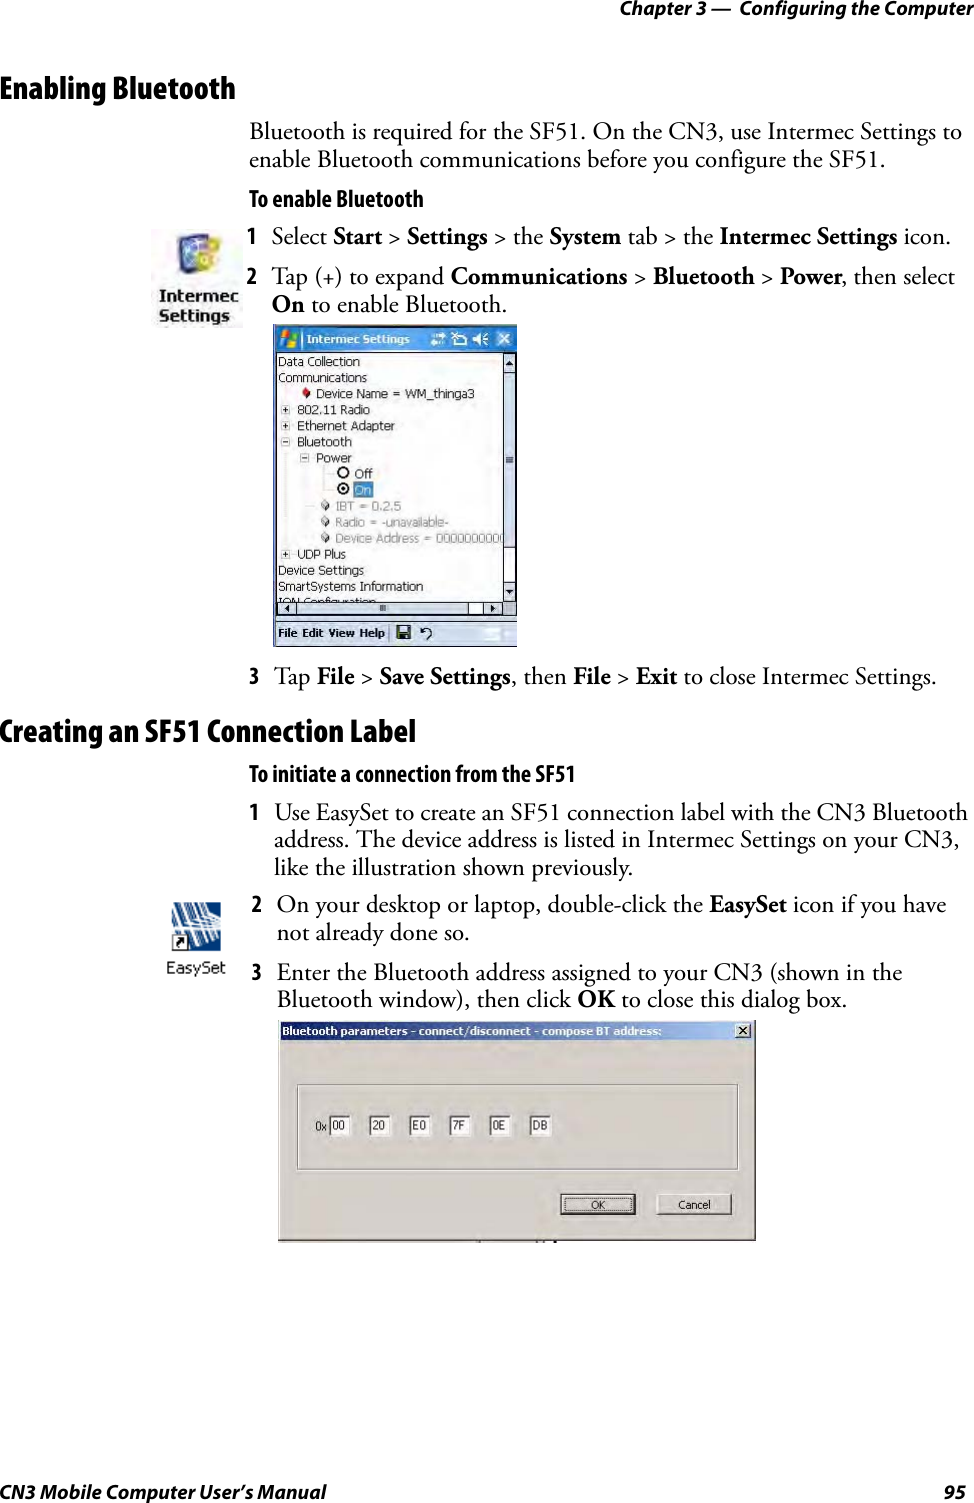 Chapter 3 —  Configuring the ComputerCN3 Mobile Computer User’s Manual 95Enabling BluetoothBluetooth is required for the SF51. On the CN3, use Intermec Settings to enable Bluetooth communications before you configure the SF51.To enable Bluetooth3Tap  File &gt; Save Settings, then File &gt; Exit to close Intermec Settings.Creating an SF51 Connection LabelTo initiate a connection from the SF511Use EasySet to create an SF51 connection label with the CN3 Bluetooth address. The device address is listed in Intermec Settings on your CN3, like the illustration shown previously.1Select Start &gt; Settings &gt; the System tab &gt; the Intermec Settings icon.2Tap (+) to expand Communications &gt; Bluetooth &gt; Power, then select On to enable Bluetooth.2On your desktop or laptop, double-click the EasySet icon if you have not already done so.3Enter the Bluetooth address assigned to your CN3 (shown in the Bluetooth window), then click OK to close this dialog box. 